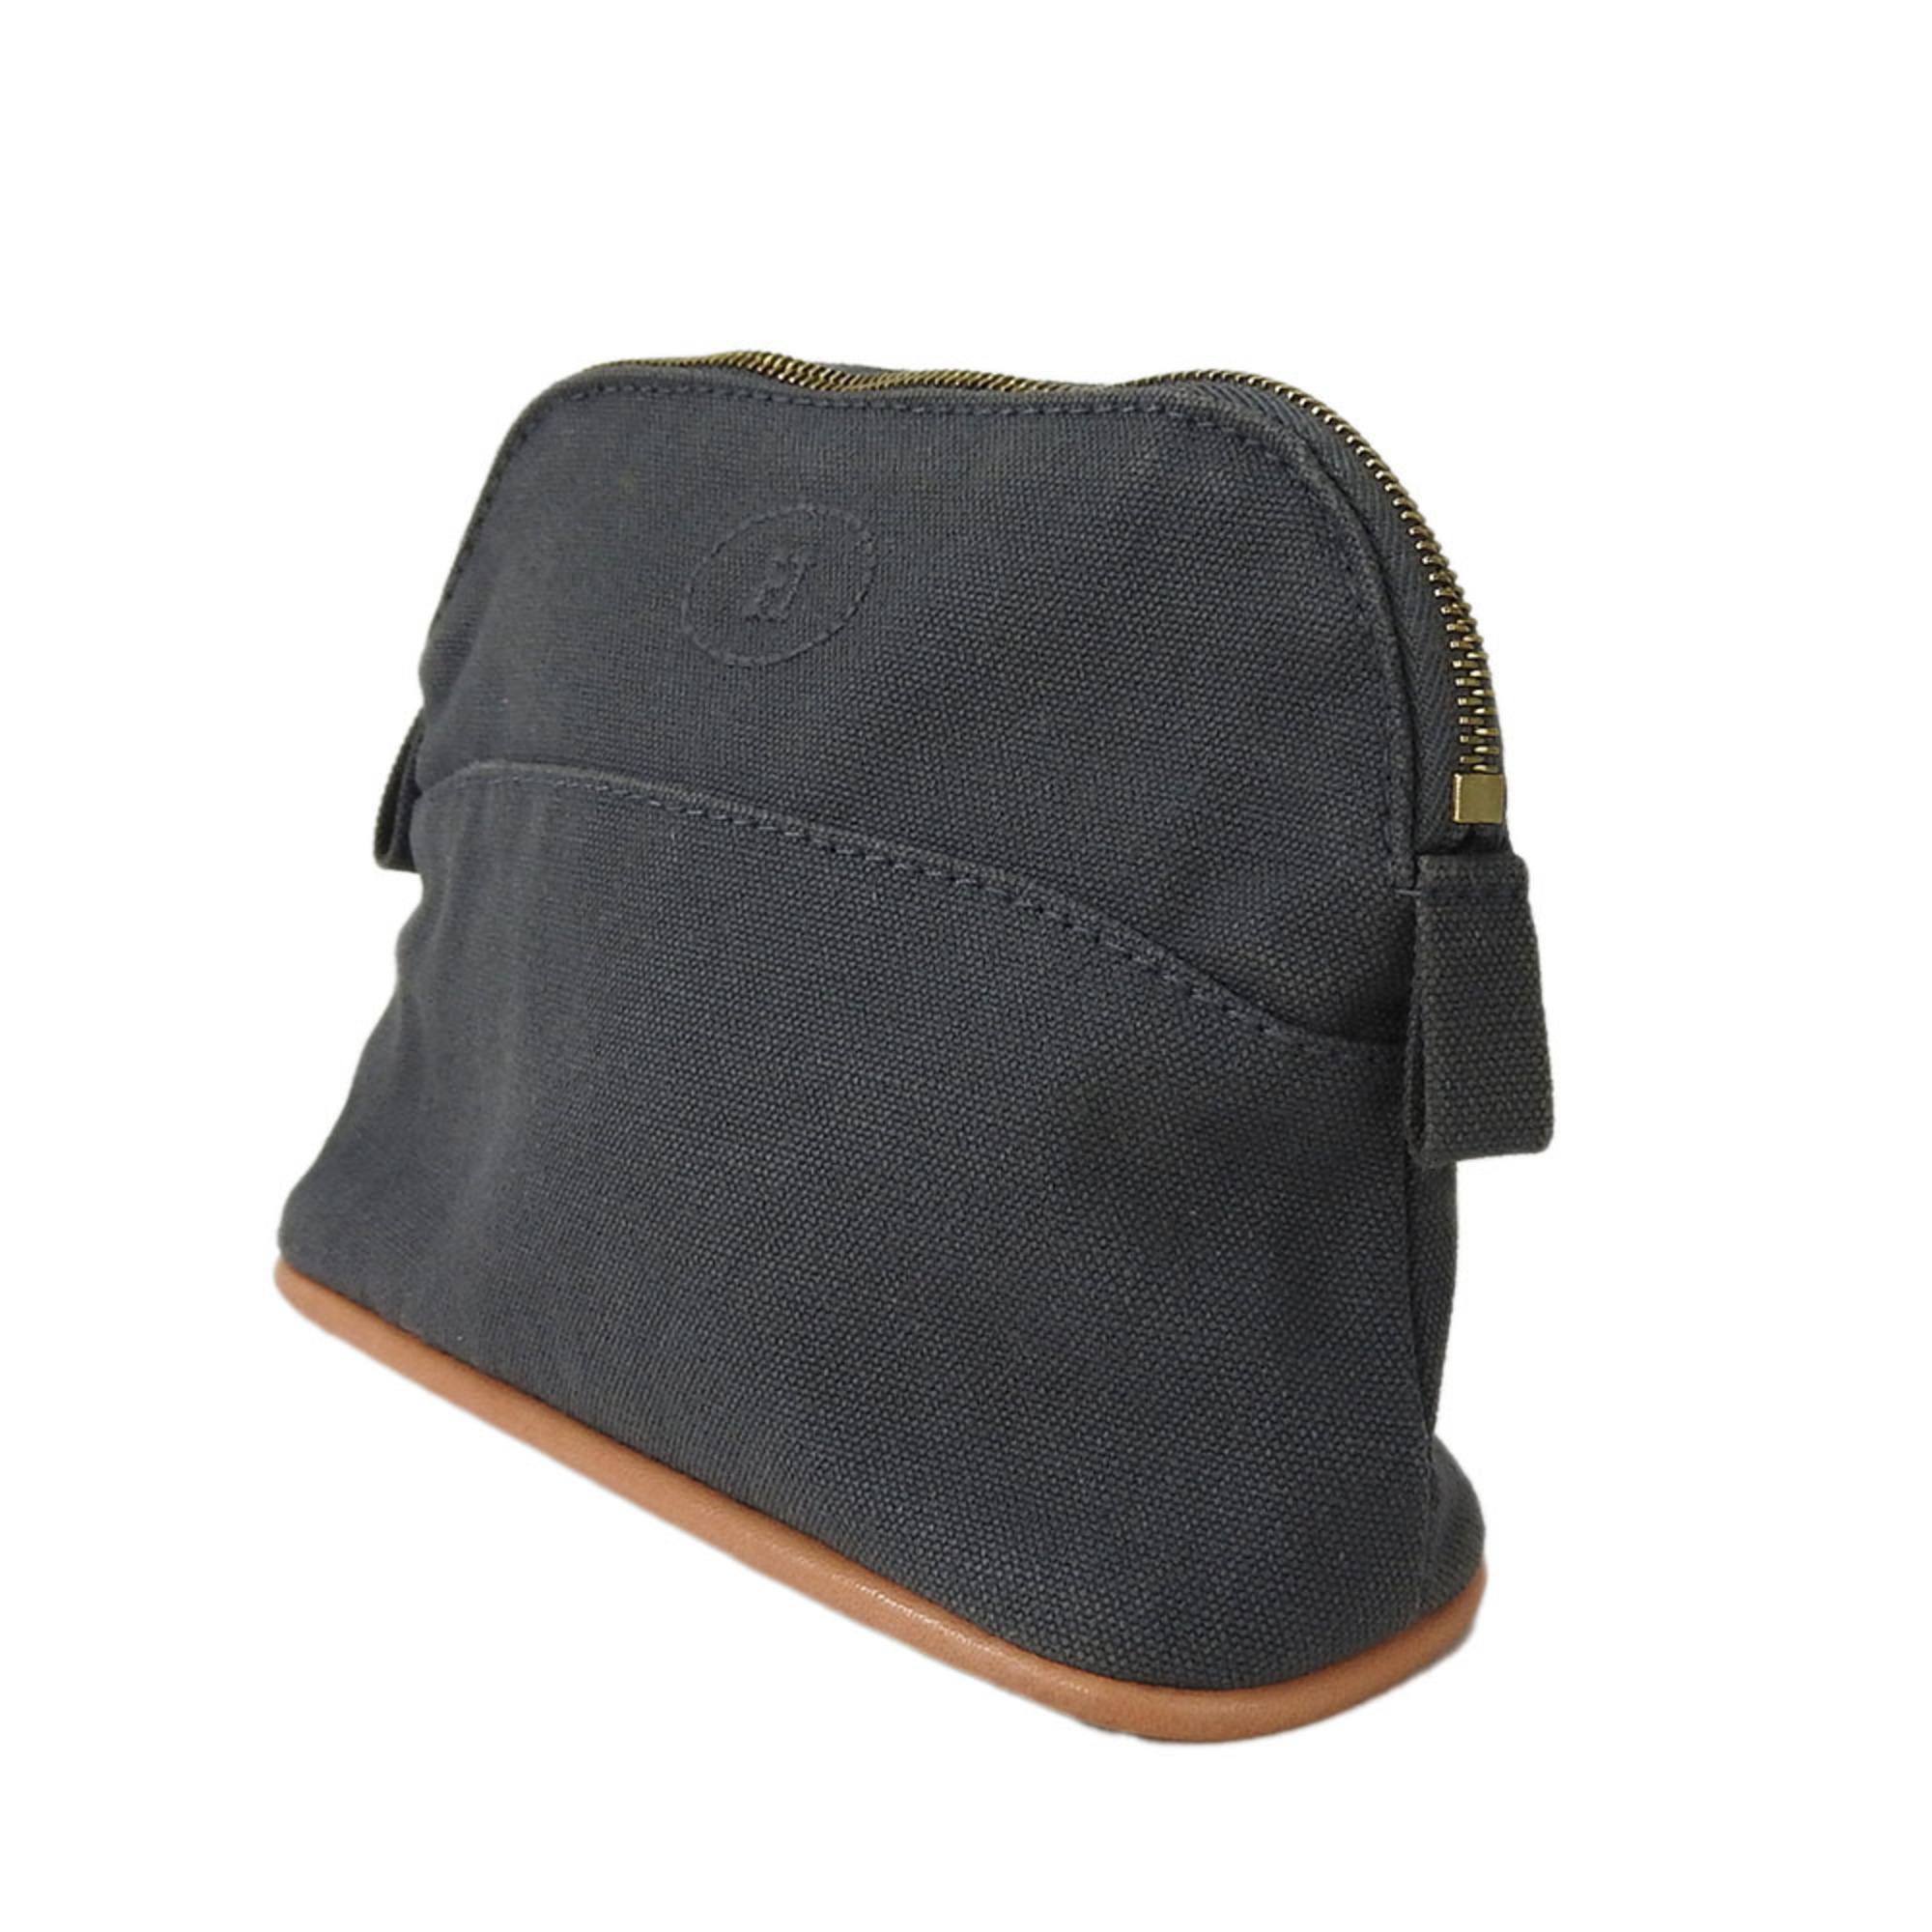 Hermes pouch Bolide canvas grey bag-in-bag accessory HERMES